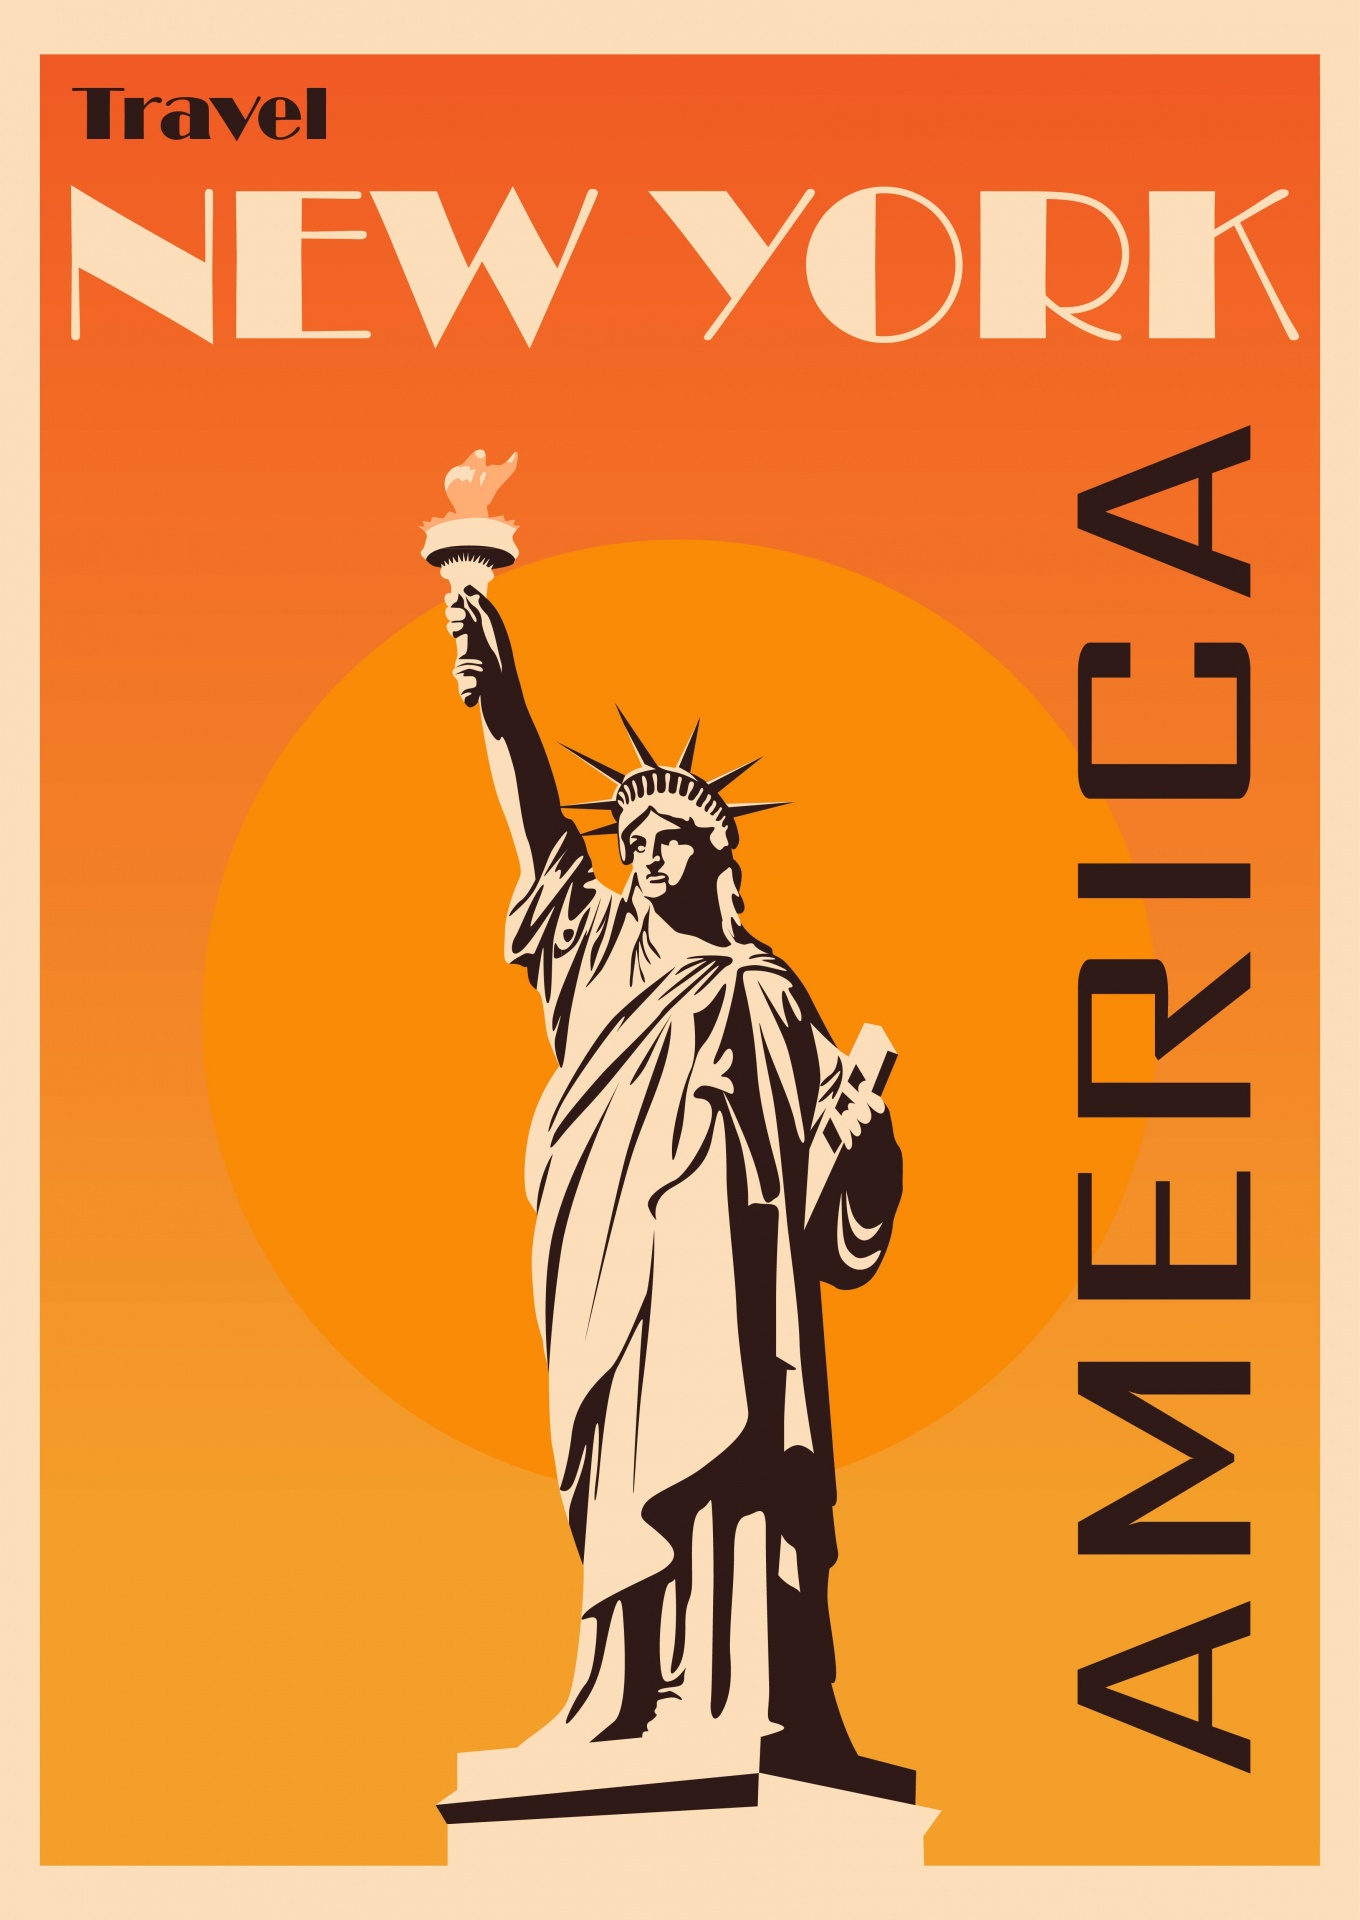 Retro, vintage style yet modern and fresh travel poster for New York, America, USA at sunset with silhouette of statue of liberty